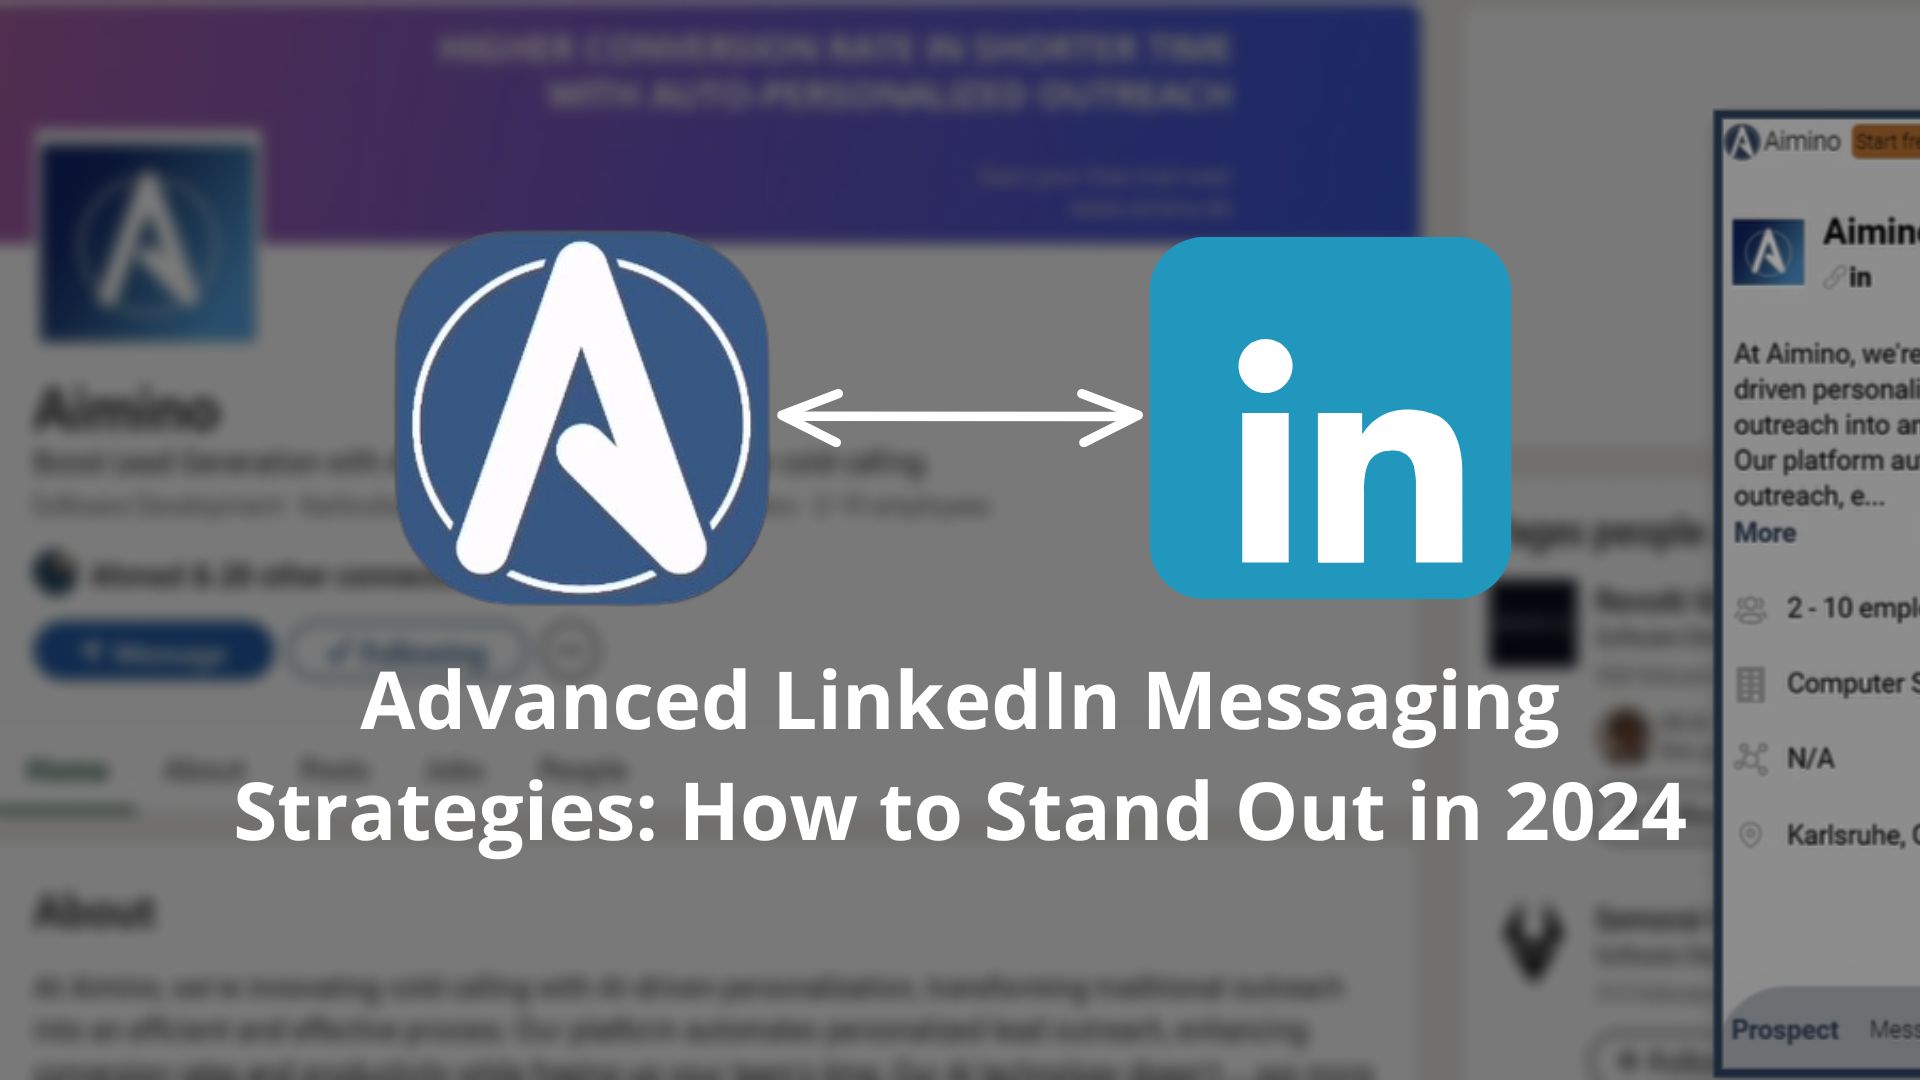 Advanced LinkedIn Messaging Strategies: How to Stand Out in 2024